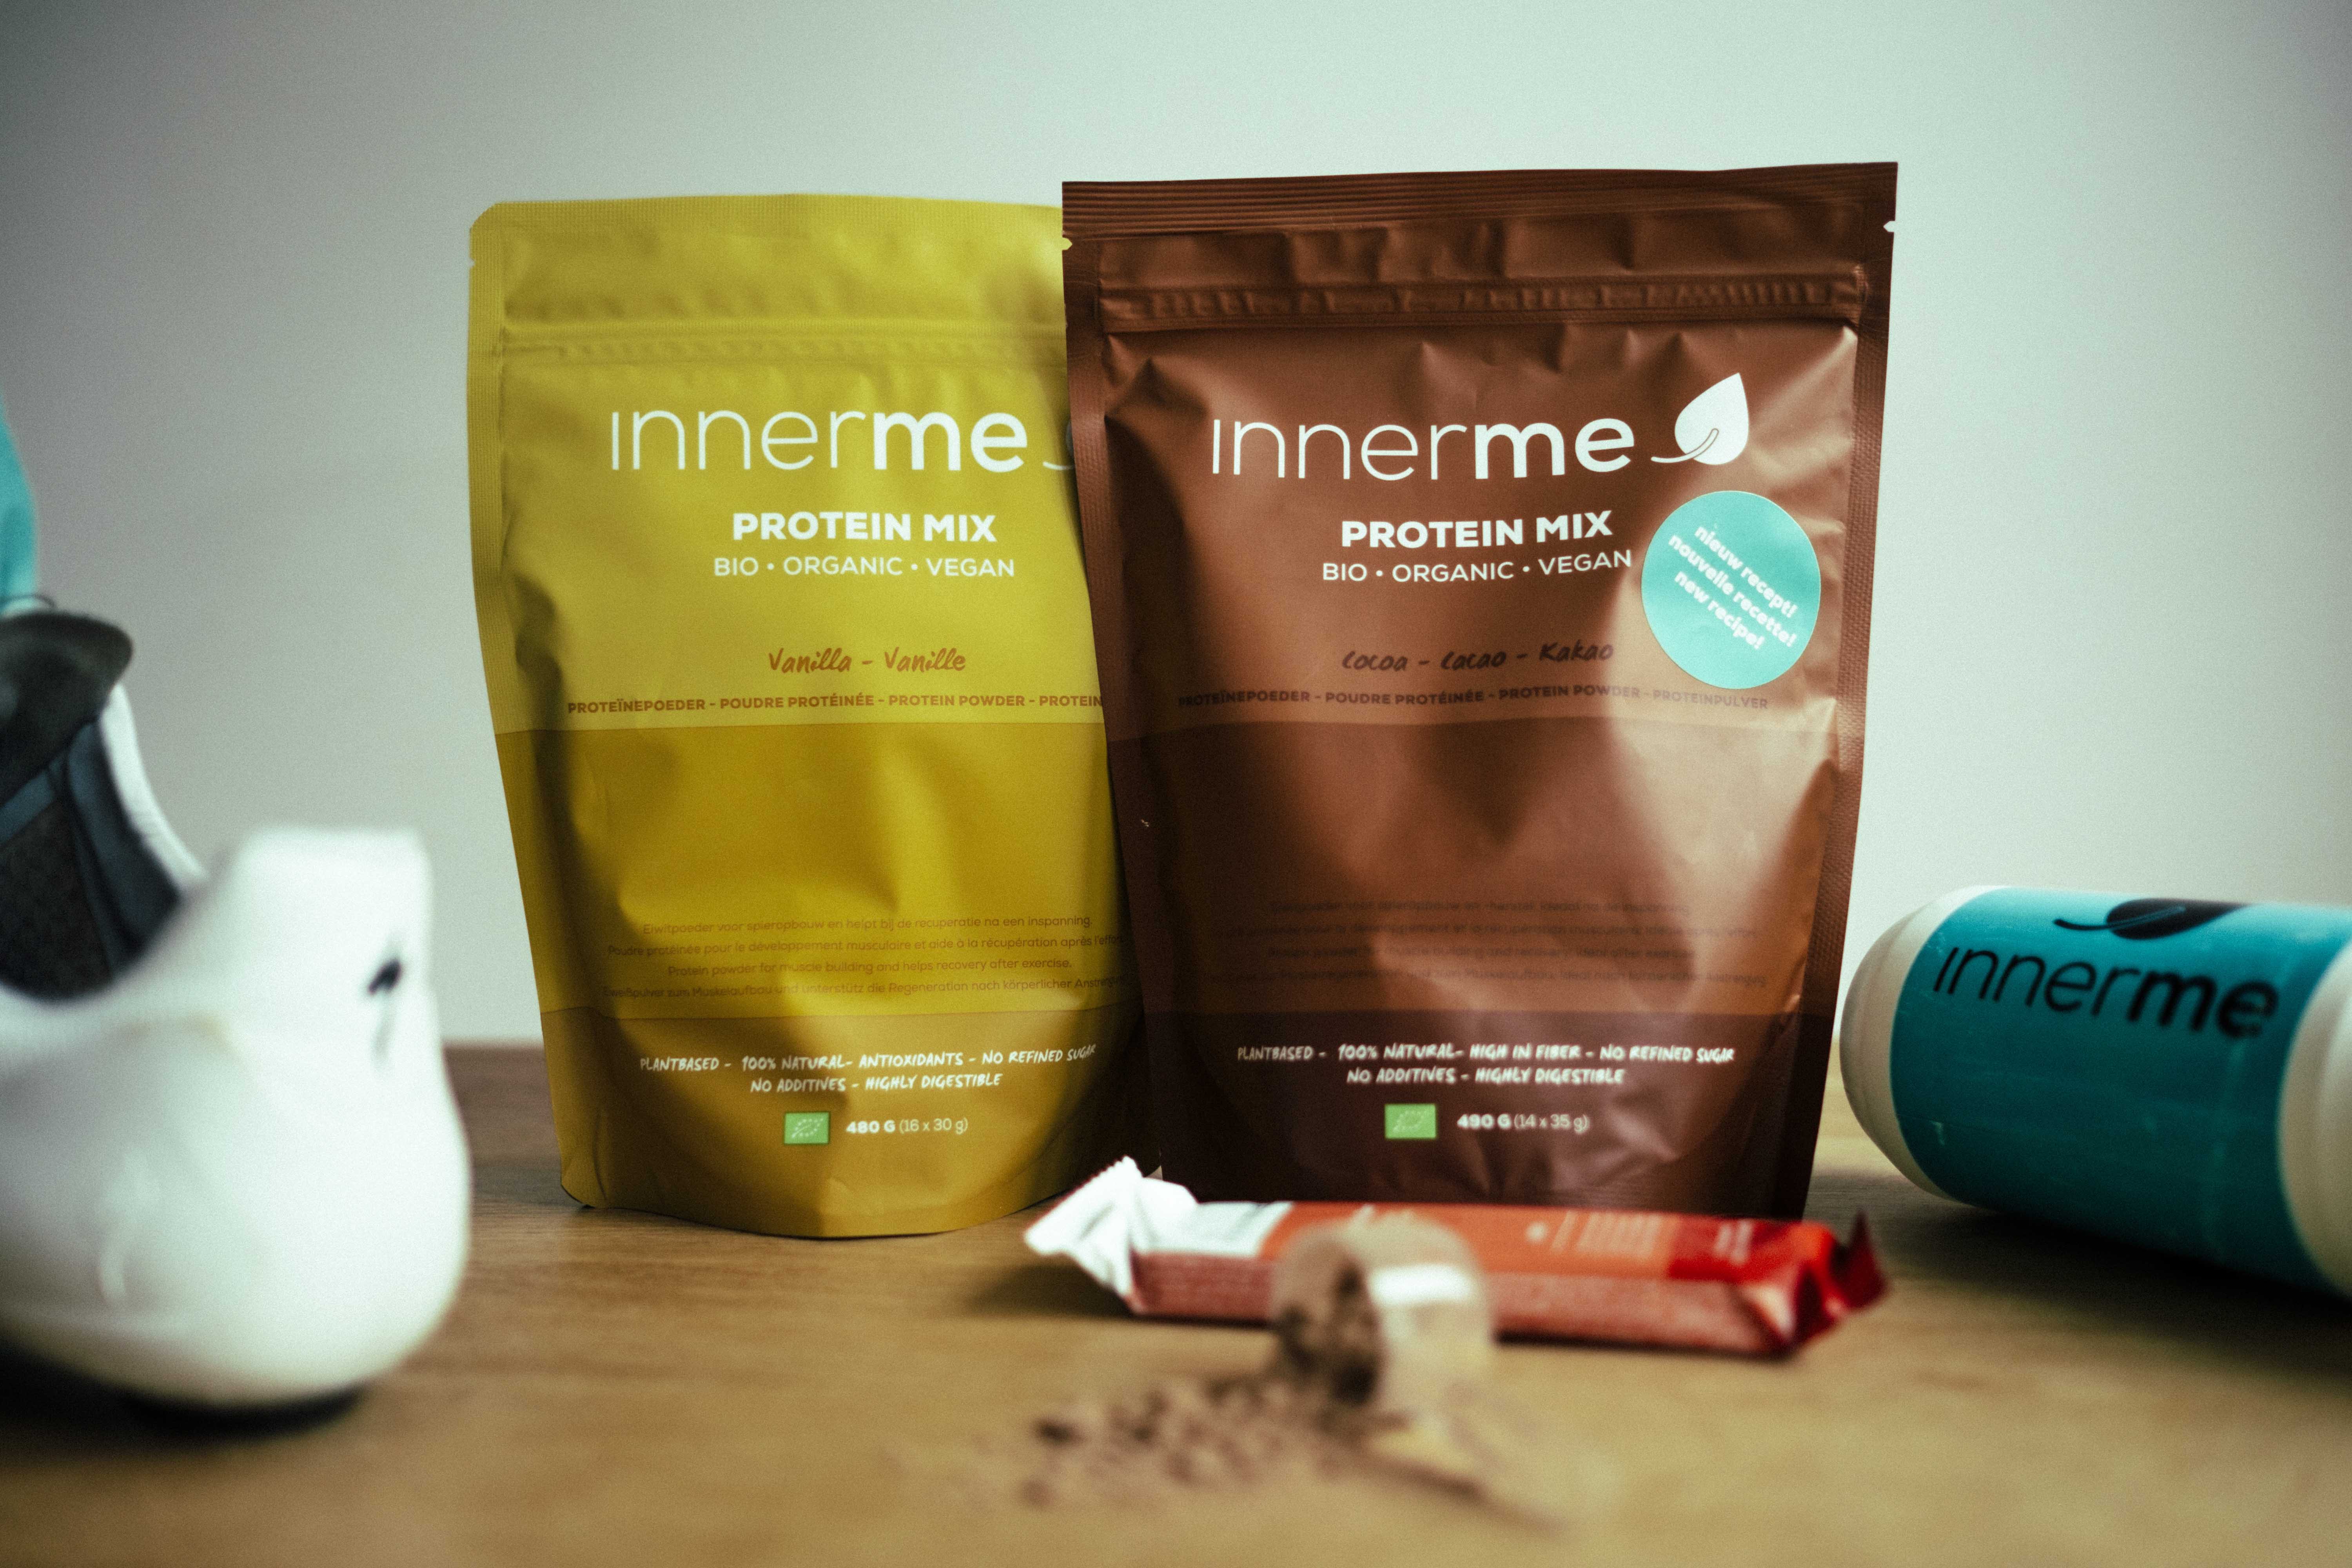 Innerme plans to bring his energy drinks, protein mix, and bars to America: 1) ISO Energy Drink for before, during, or after working out. ISO Energy Drink is a pure and natural sports drink for all ages. It is a healthy, organic thirst-quencher with high-quality ingredients, such as rice, agave, Celtic sea salt, and freeze-dried fruit. 2) Protein Mix Cacao for after workout recovery. The Innerme Protein Mix is a vegetable-based, protein-rich food that can build muscles and help you recover after exercising. It provides all the essential amino acids you need. The mix is not only easy to digest, but it also has a delicious, natural taste. 3) Energy Bars for before, during, and after working out, or as a snack. This apple-cinnamon flavored bar is delicious and easy to digest and provides fast and long-lasting energy. It is 100 percent natural and 100 percent vegan without refined sugar or fructose. 